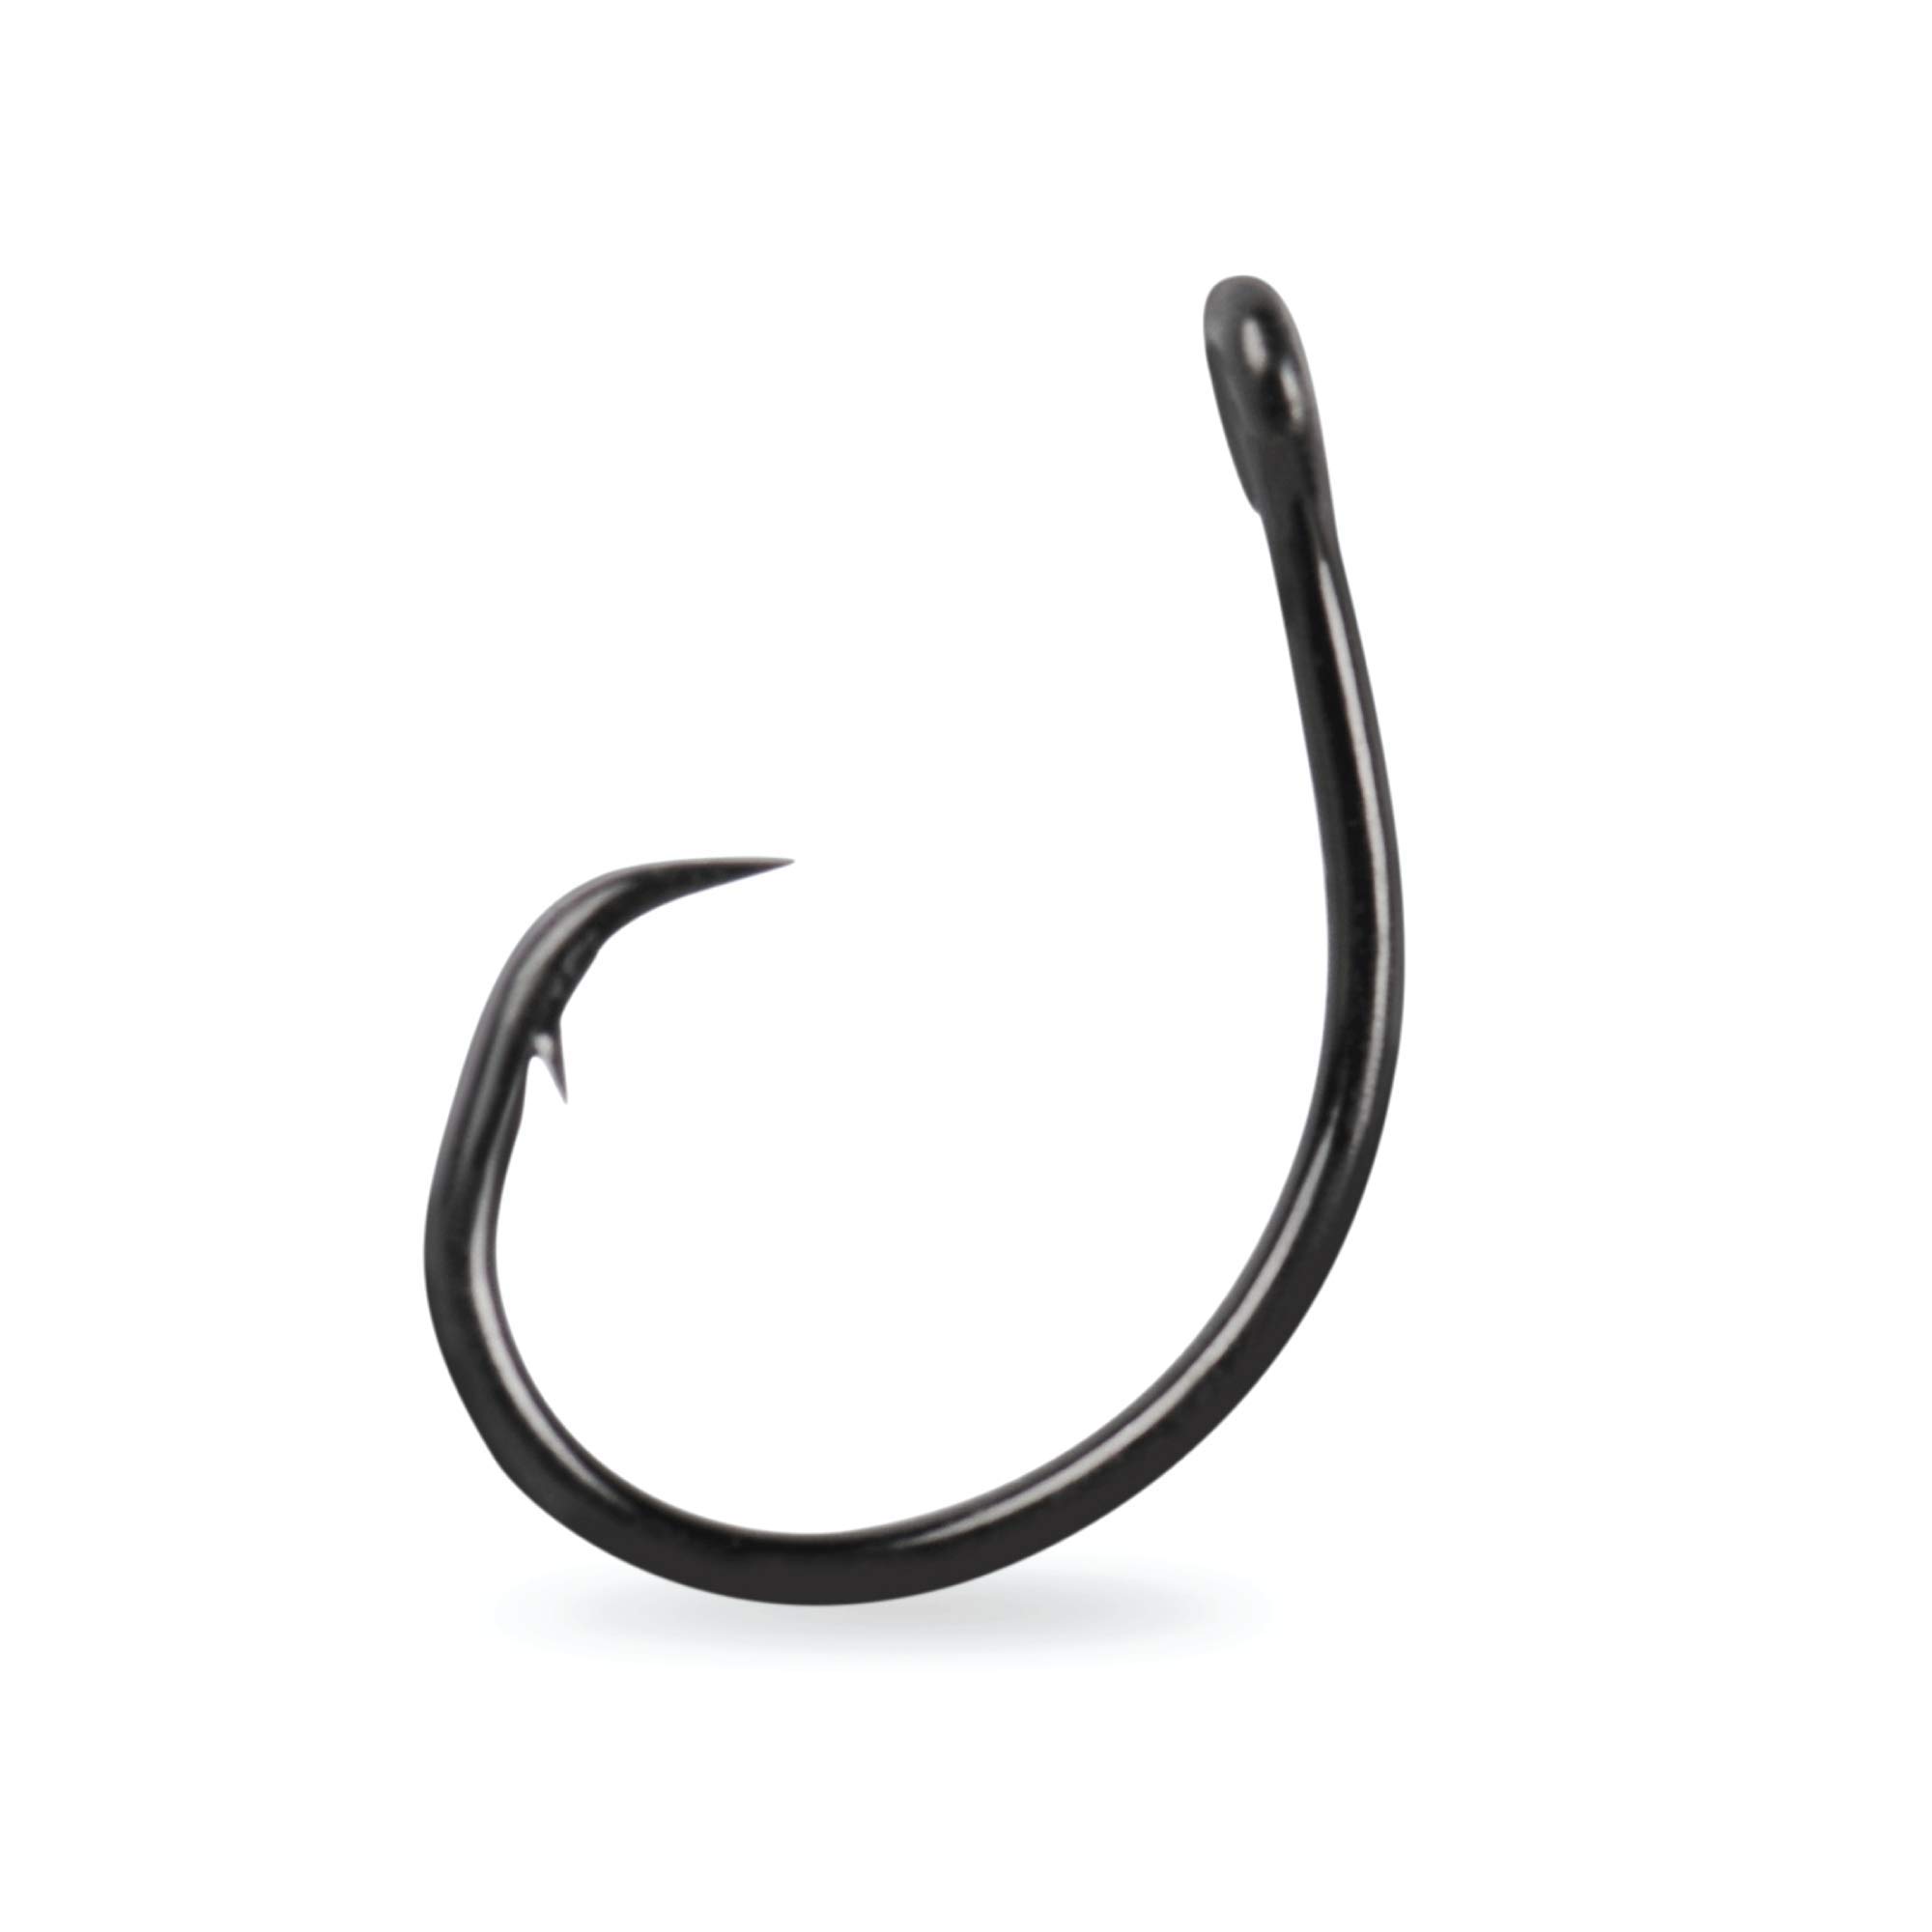 Mustad UltraPoint Demon Wide Gap Perfect In-Line Circle 1 Extra